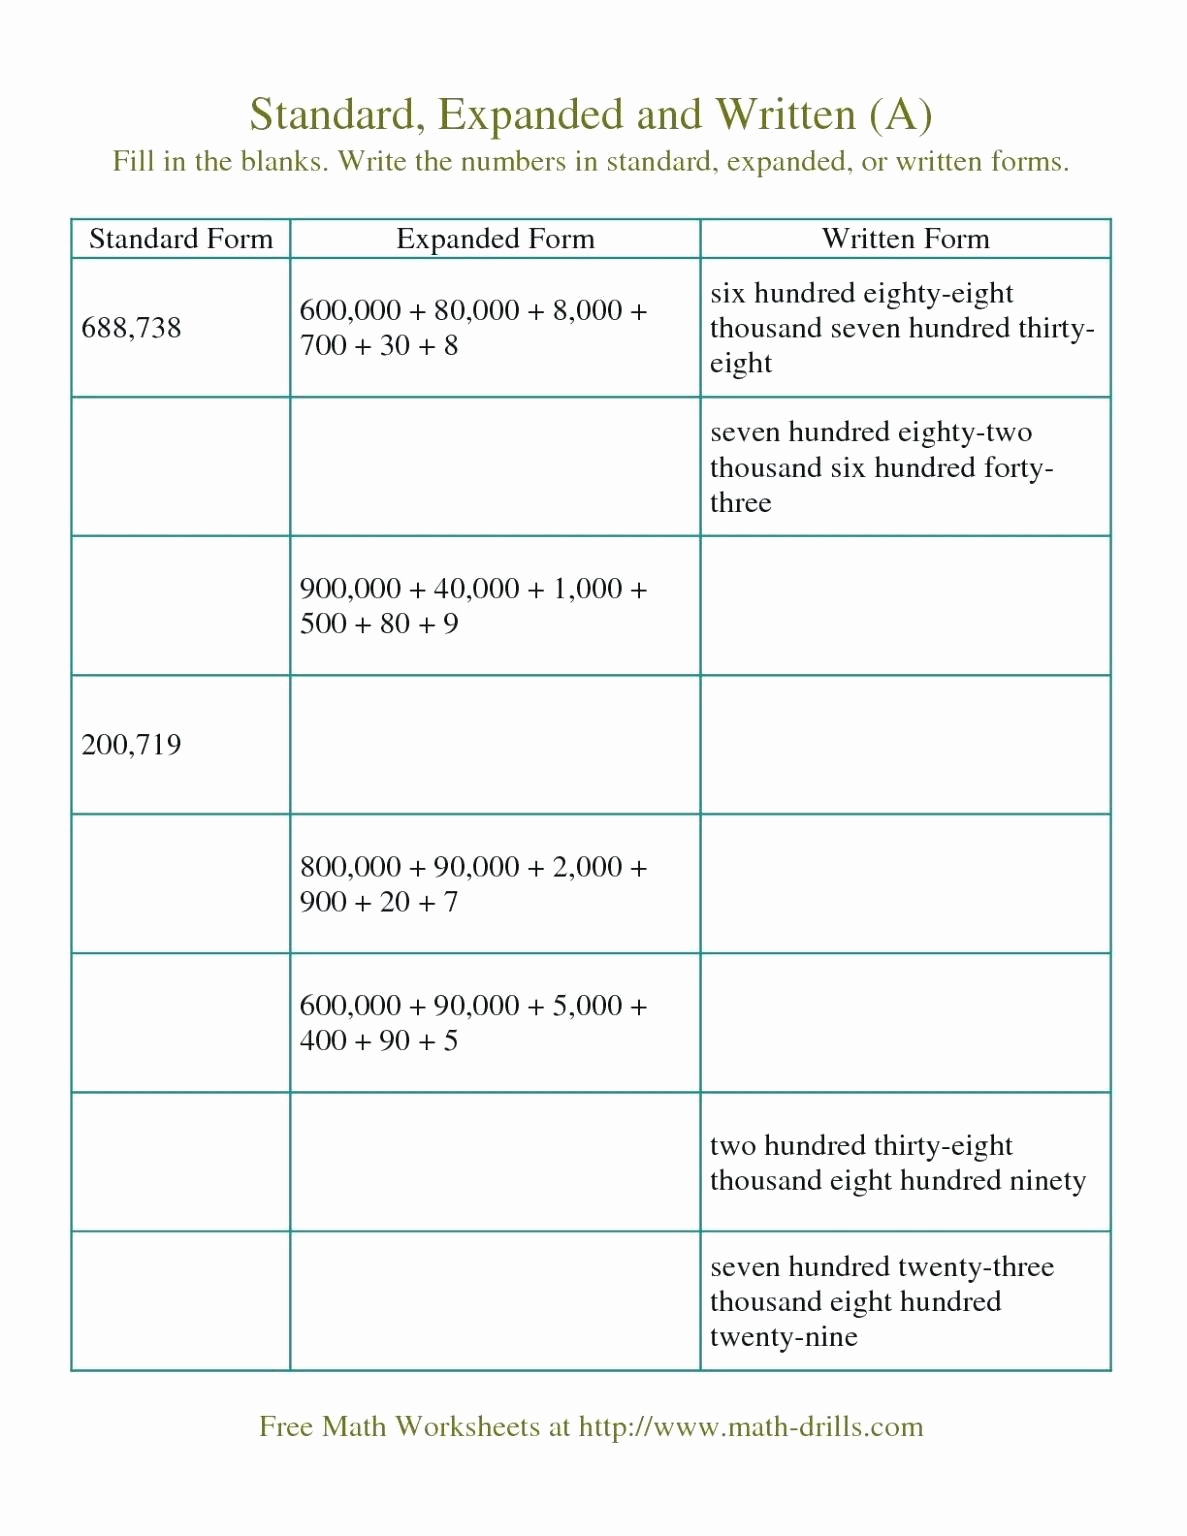 5th Grade Expanded form Worksheets Lovely Expanded form Worksheets 5th Grade Place Value Worksheets